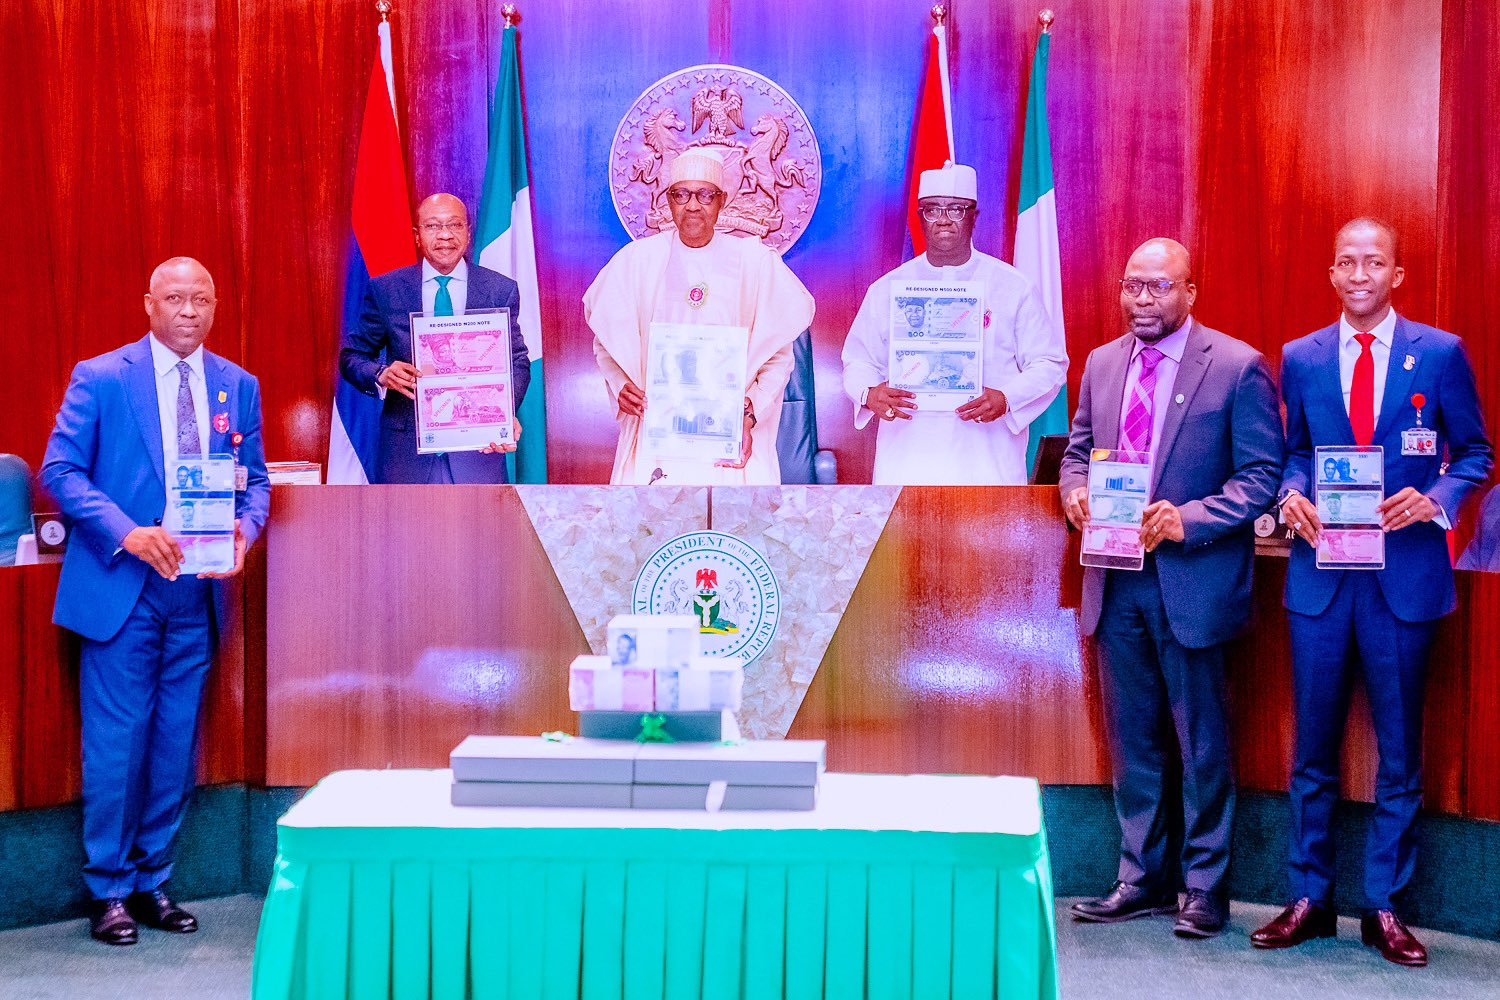 Embattled former CBN Governor, Godwin Emefiele, former President Muhammadu Buhari, and other government officials at the launch of the redesigned naira notes